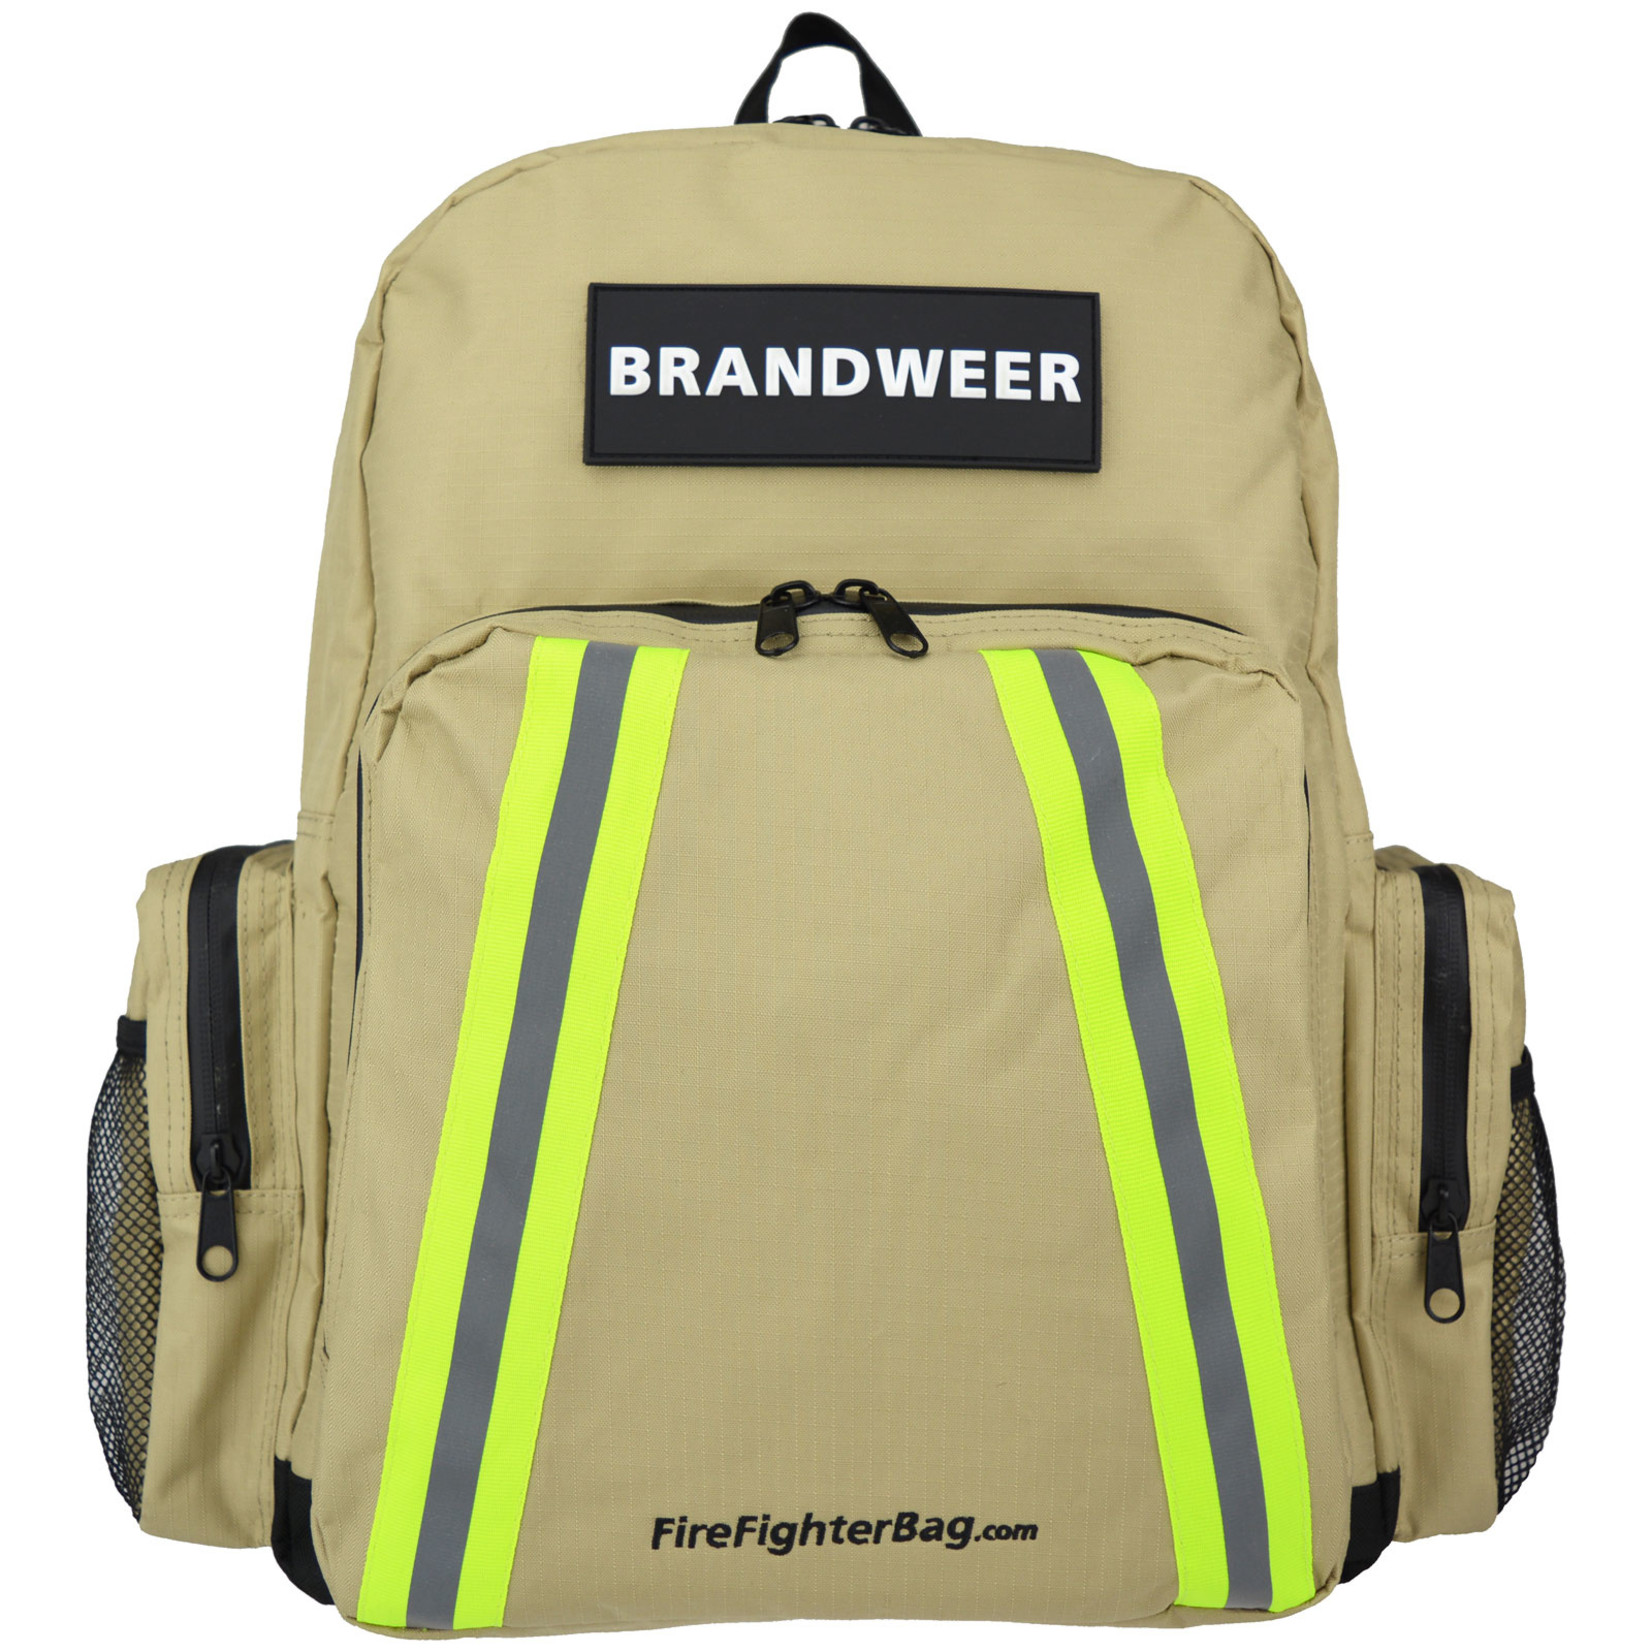 Firefighter Backpack 2.0 + Free Toiletry Bag